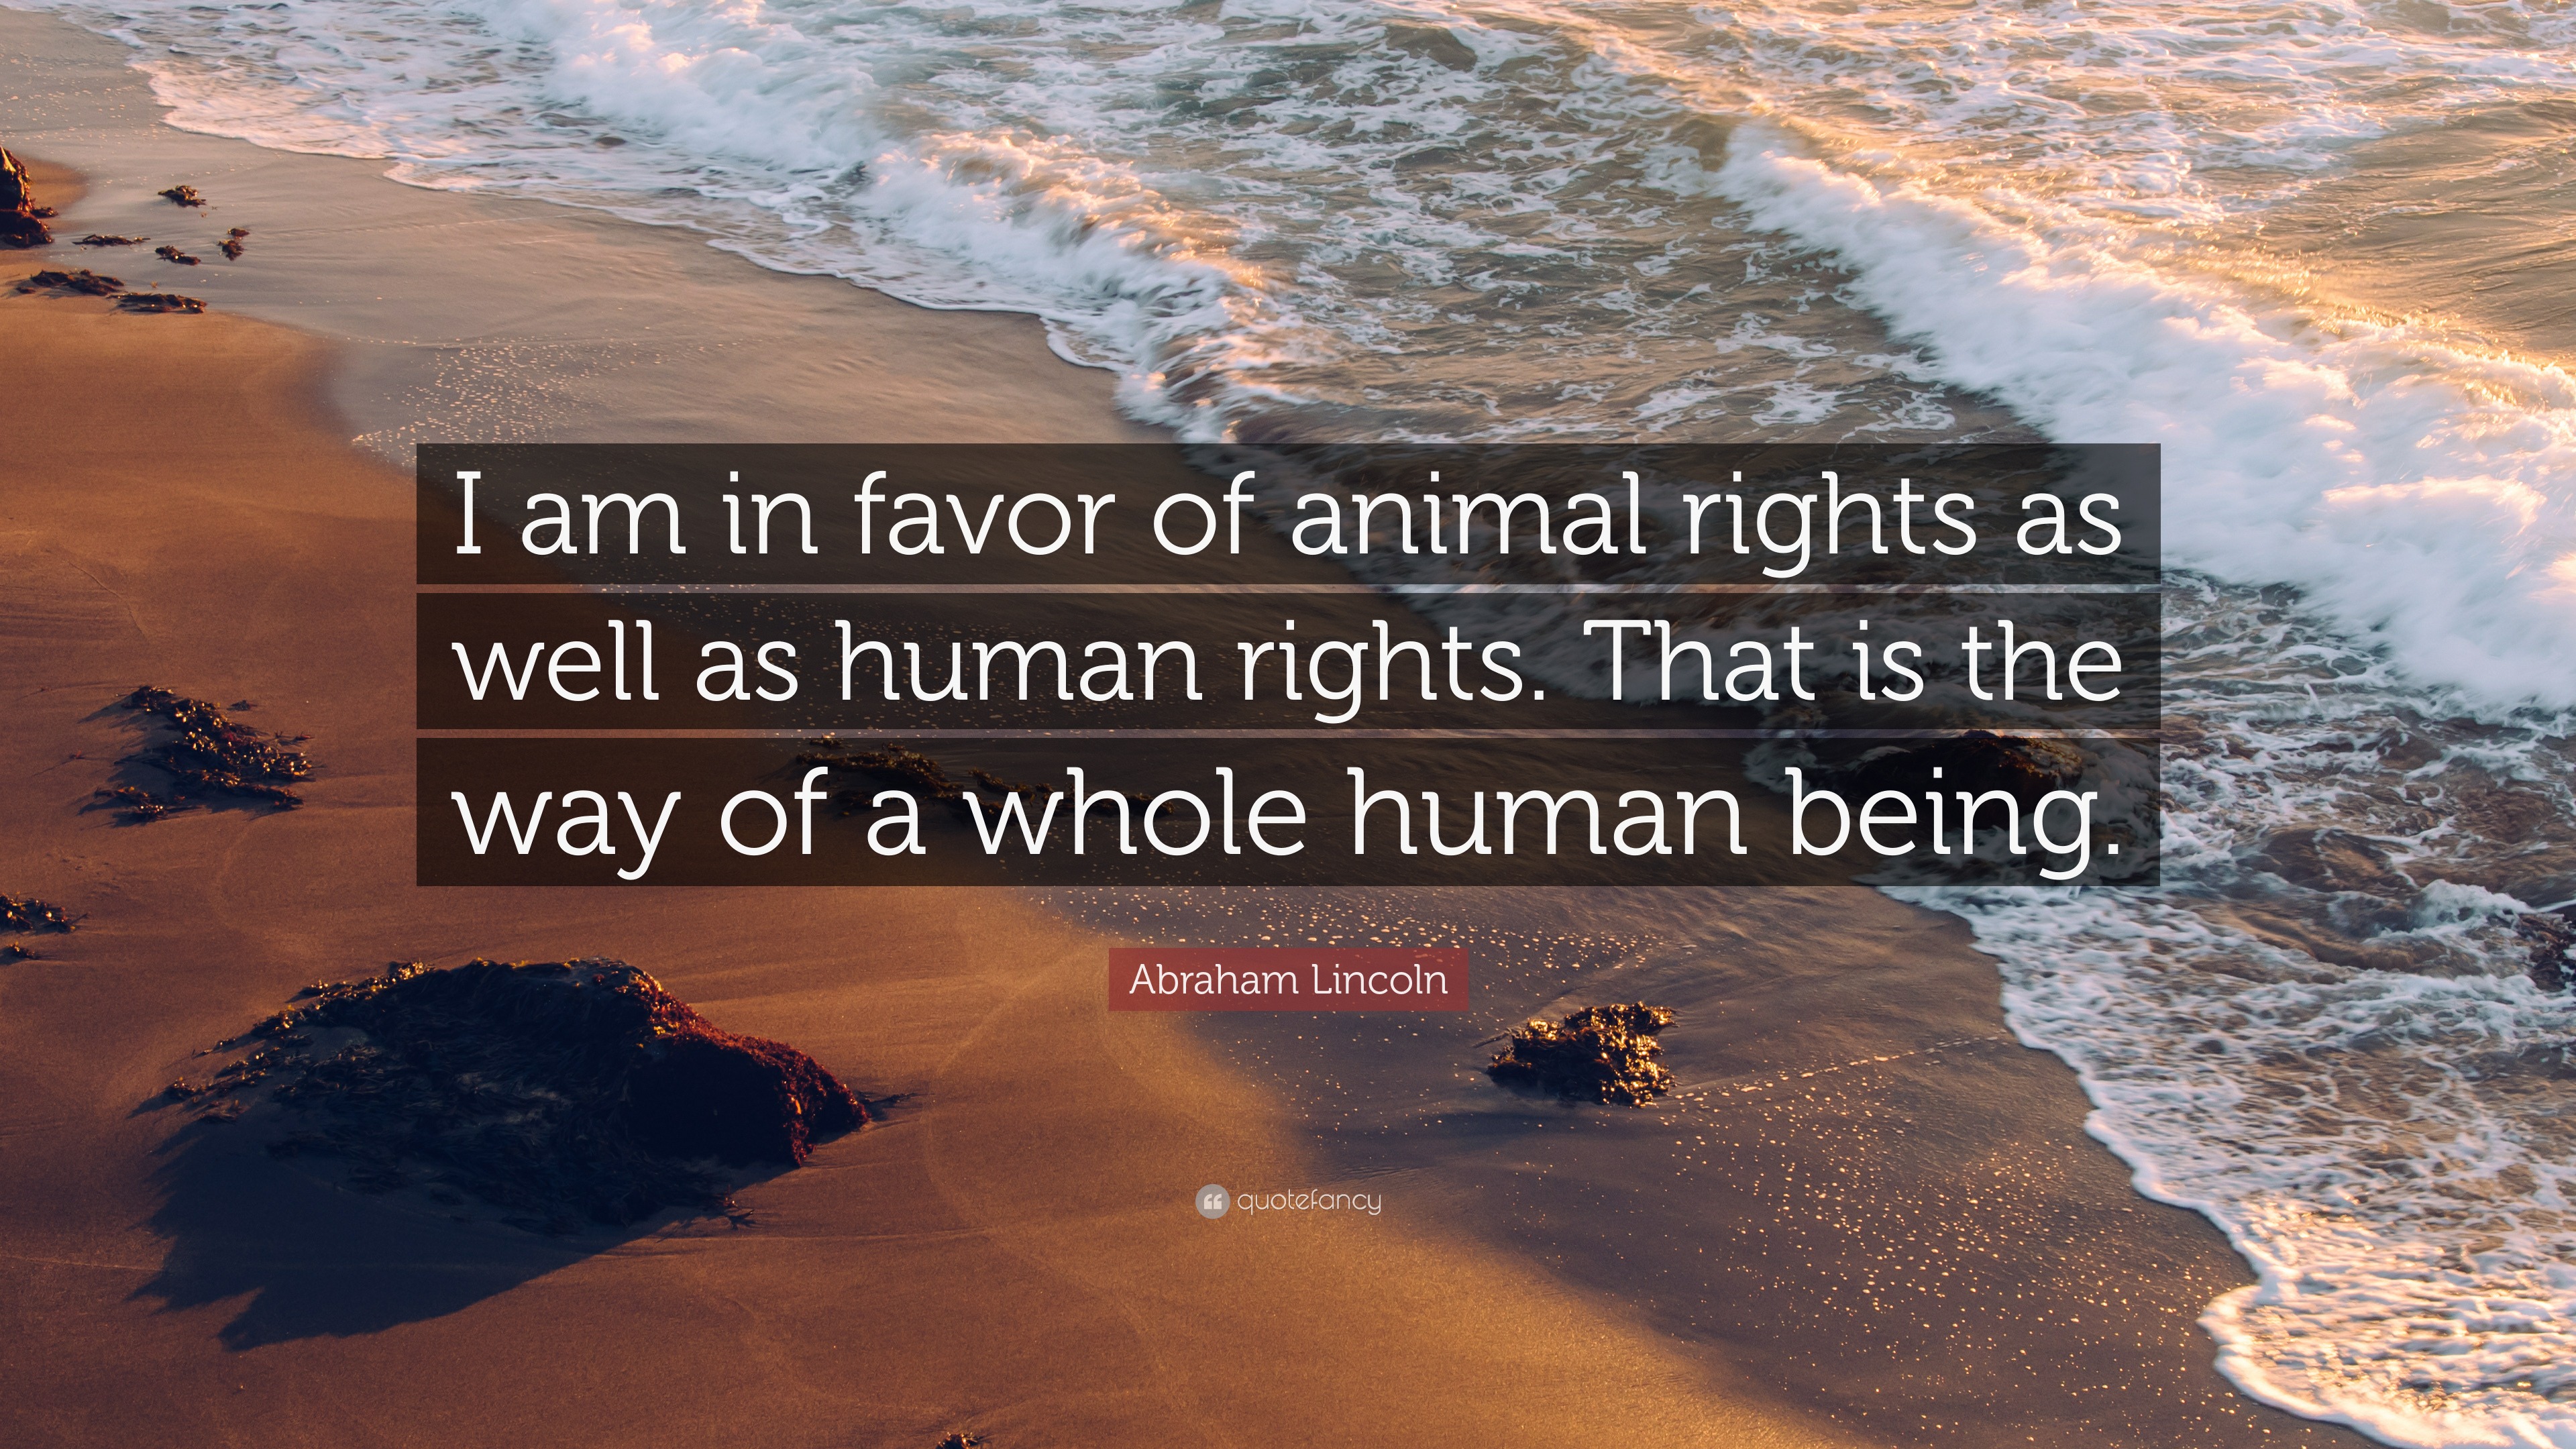 Abraham Lincoln Quote: “I am in favor of animal rights as well as human